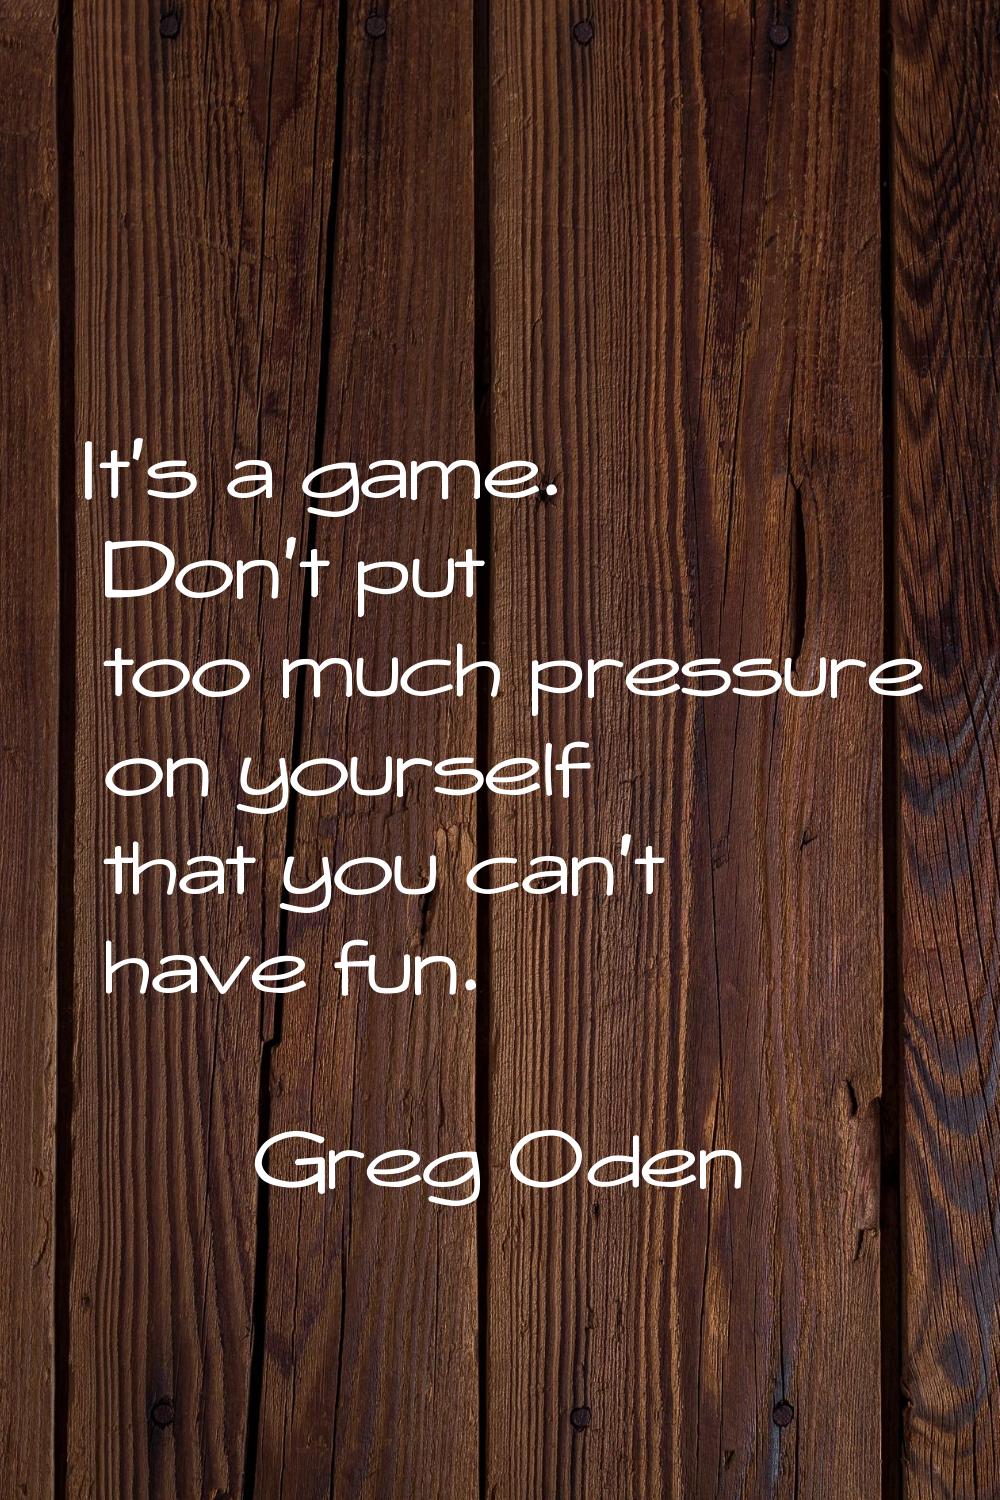 It's a game. Don't put too much pressure on yourself that you can't have fun.